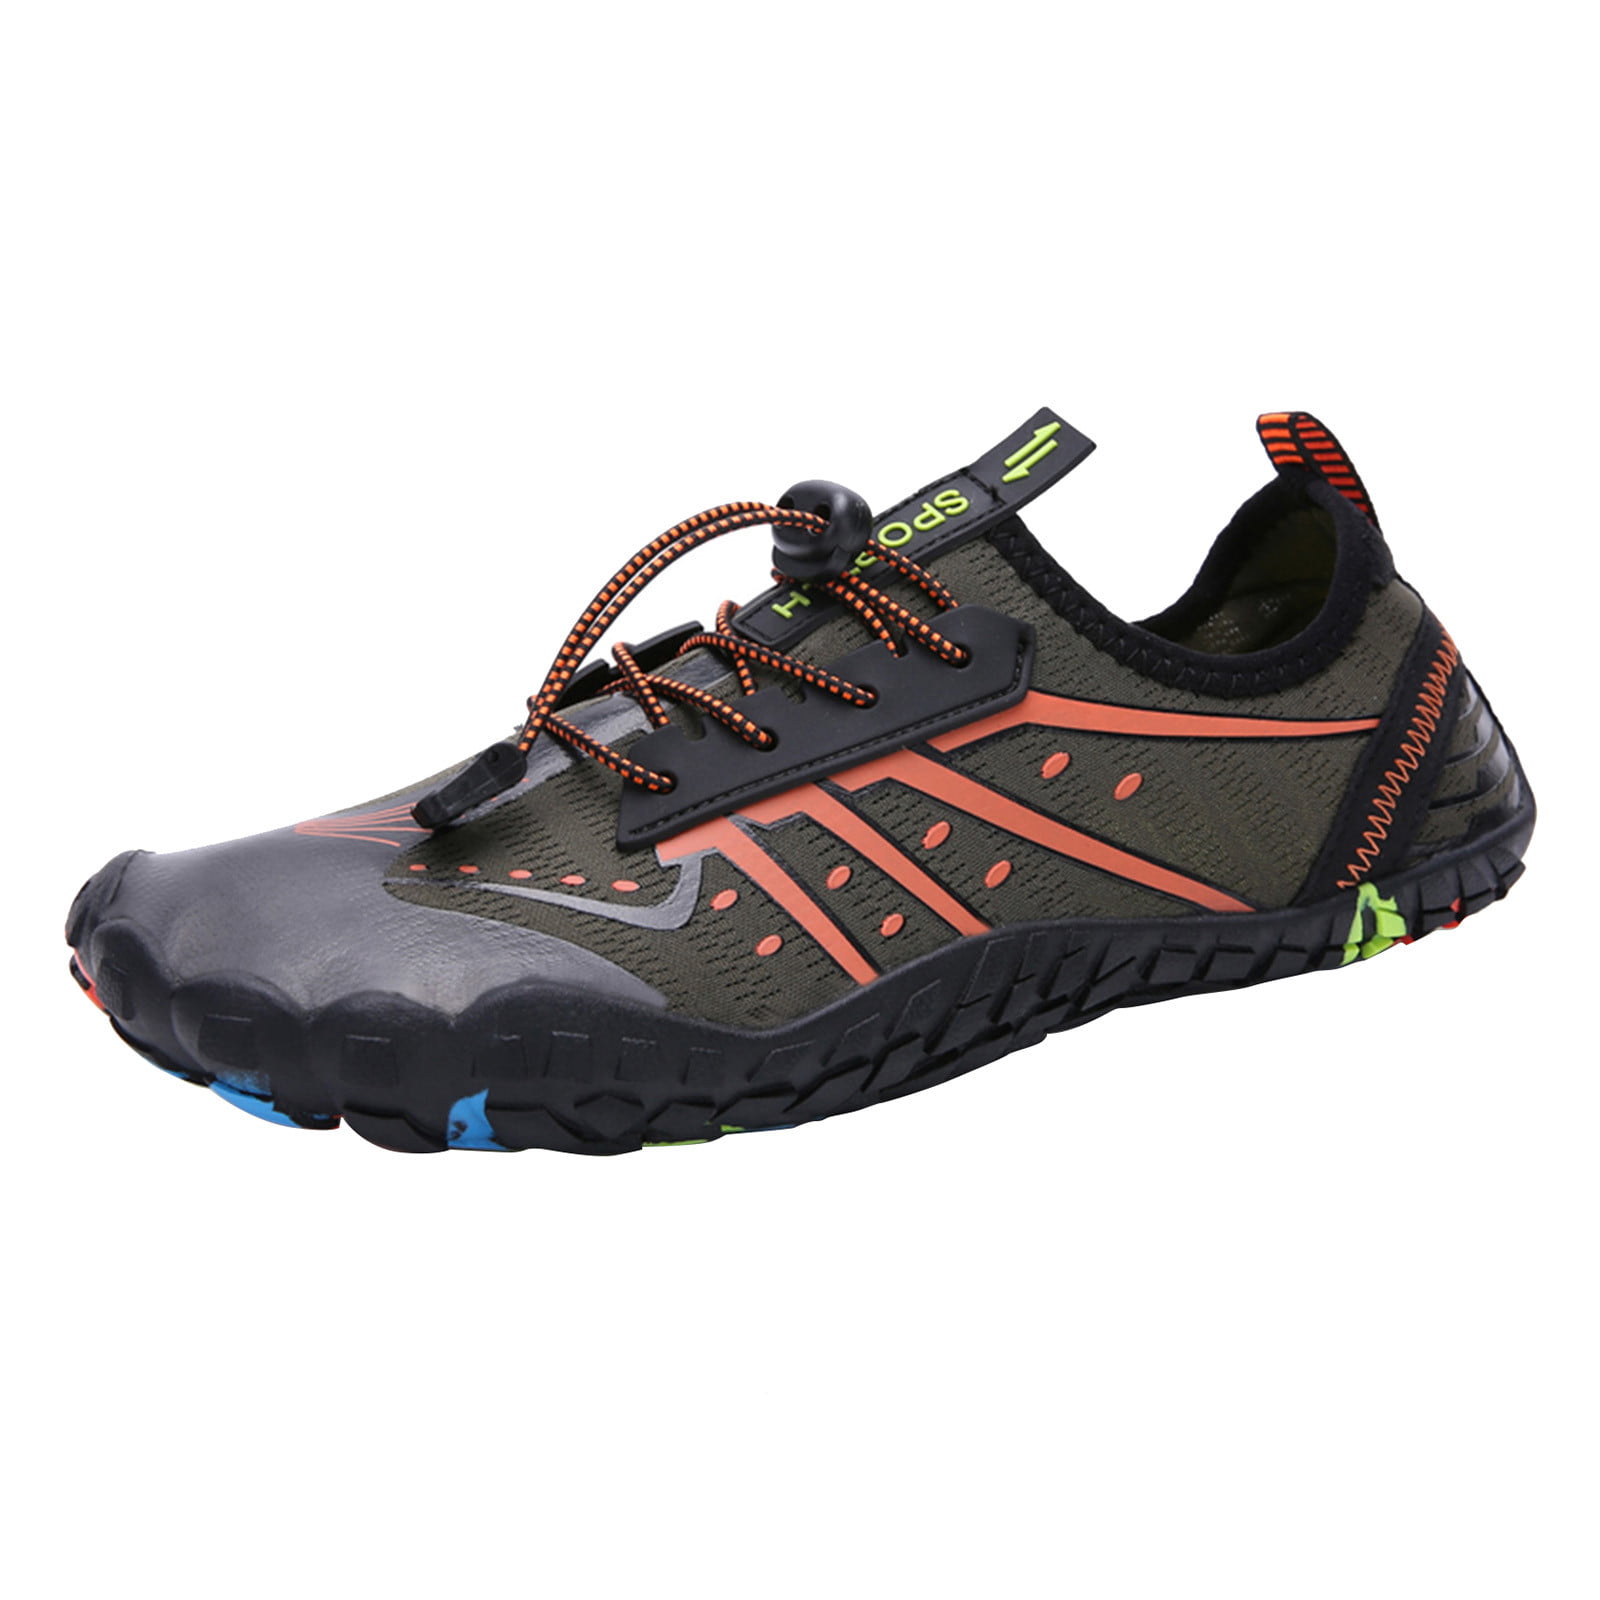 Mens Boating Water Trail Shoes Sneakers for Climbing Hiking Outdoor Exclusive Shoebox Hiking Shoes